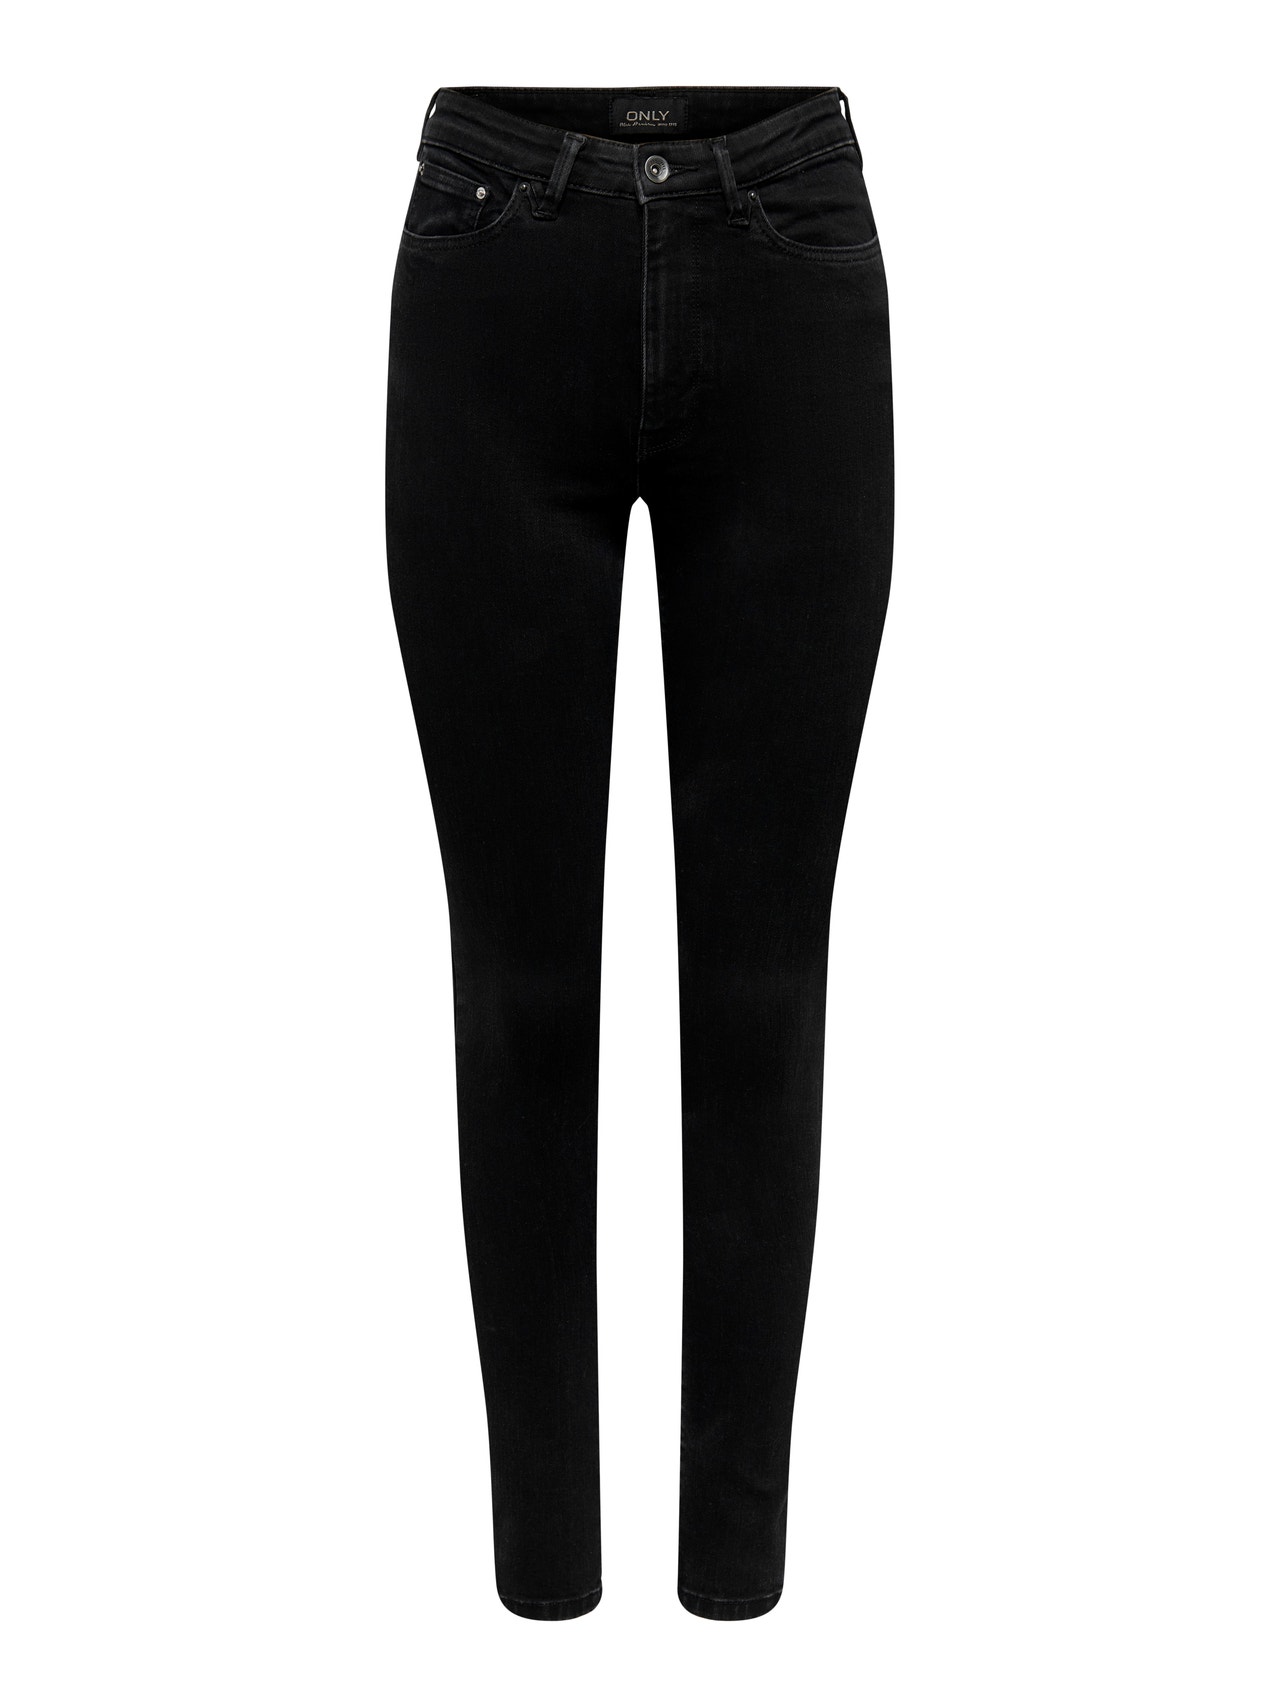 ONLY ONLICONIC High Waist SKinny LONG ANKLE Jeans -Black Denim - 15247810